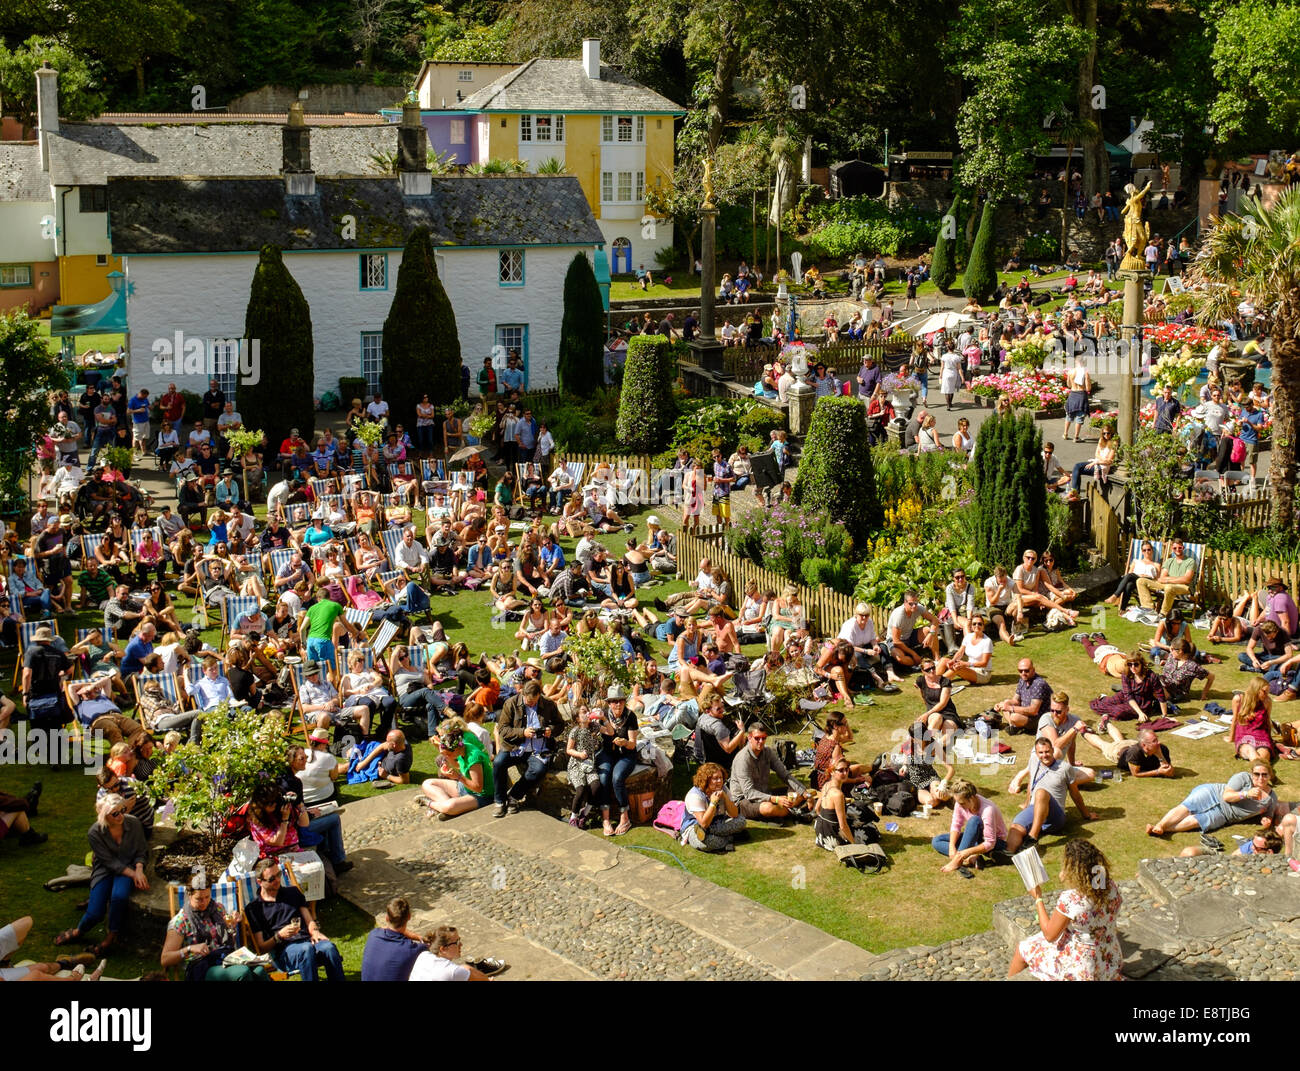 Crowd gathered waiting for a performance, during Festival No.6, on 7TH September 2014, Portmeirion, North Wales, UK Stock Photo